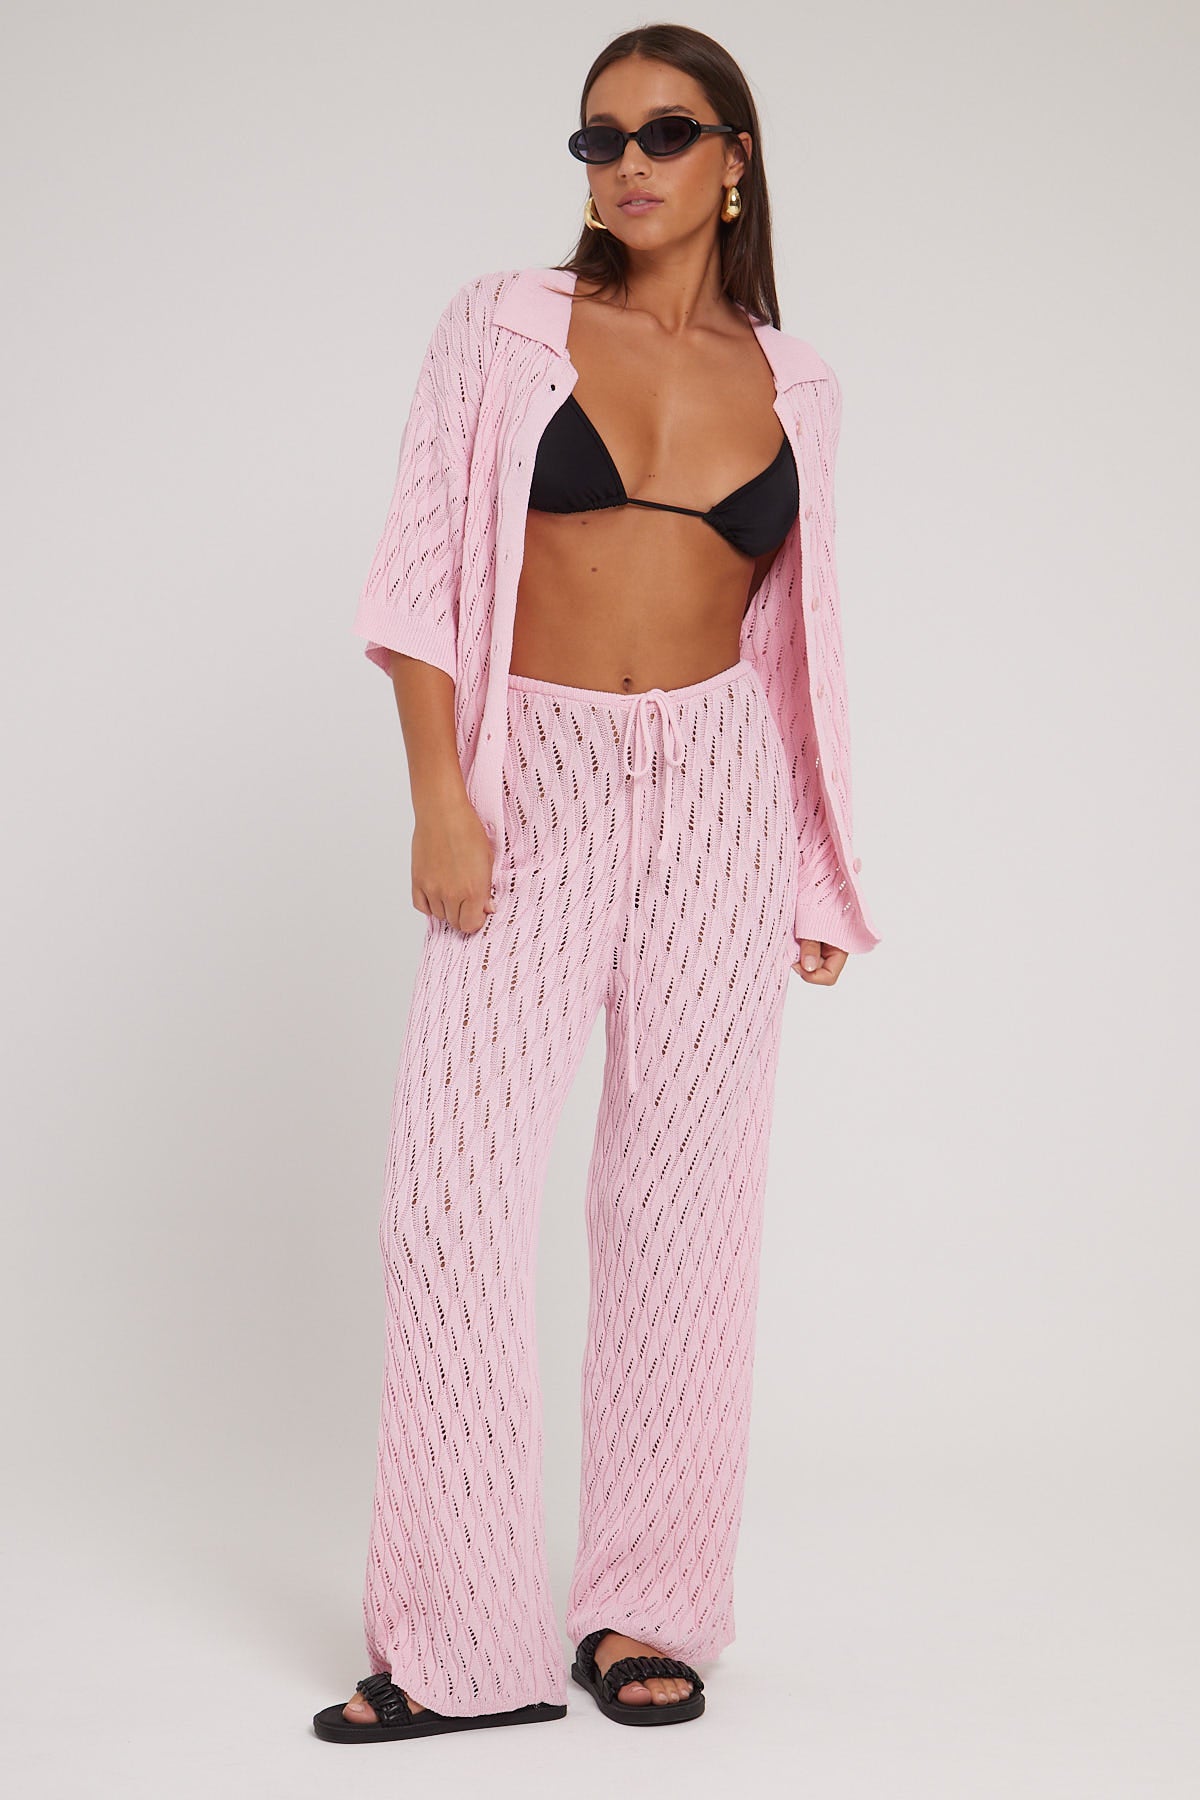 Sndys The Label Claire Pant Pink